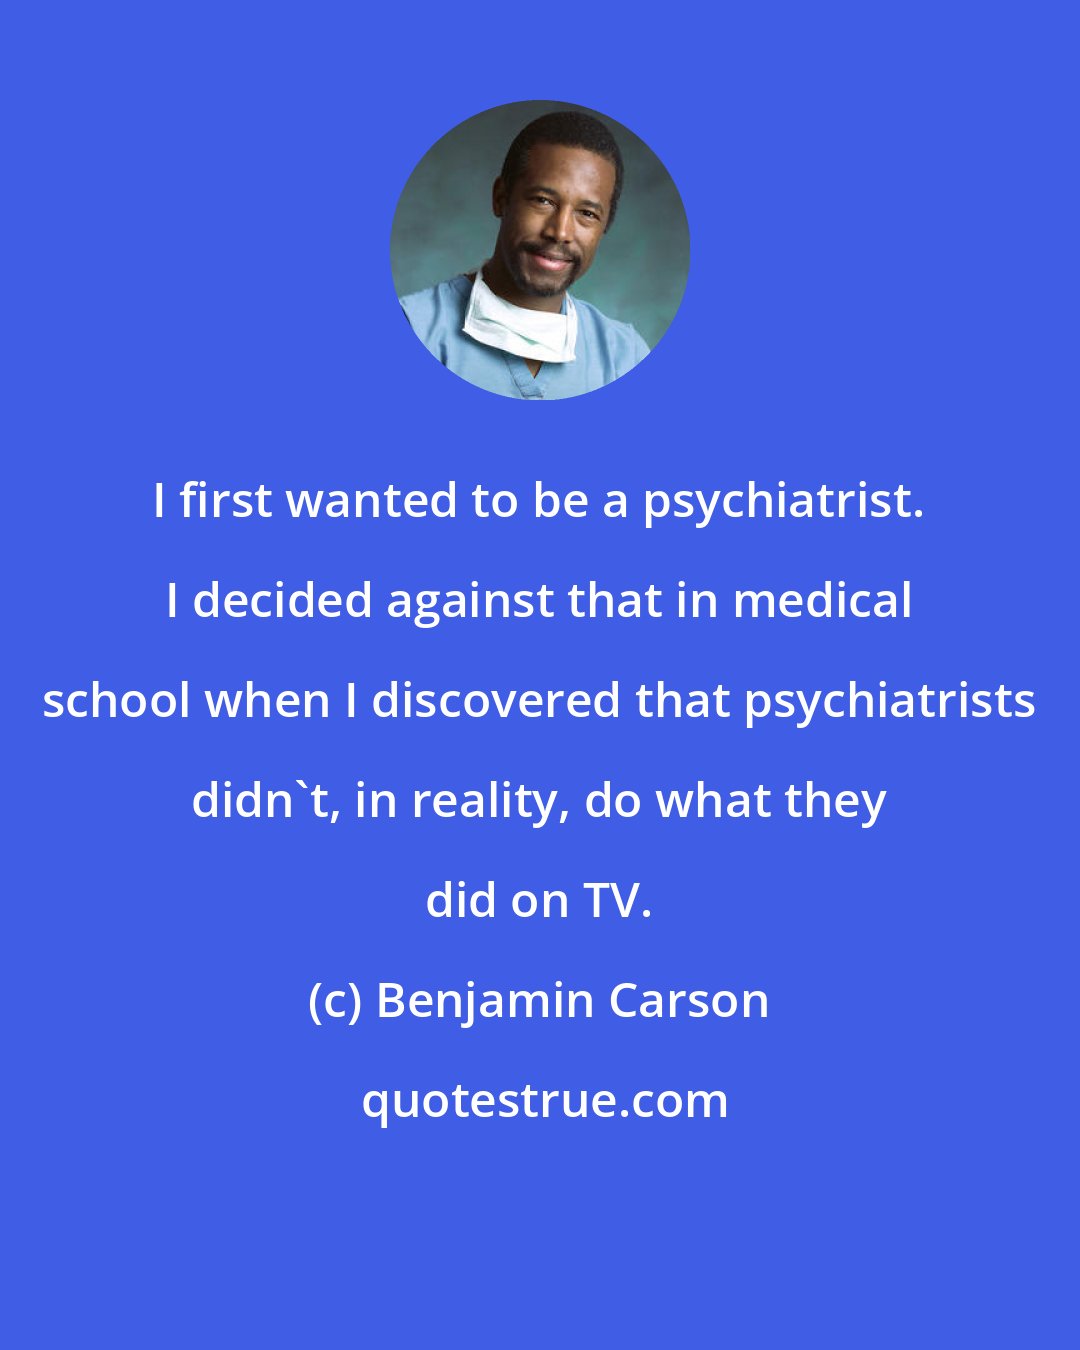 Benjamin Carson: I first wanted to be a psychiatrist. I decided against that in medical school when I discovered that psychiatrists didn't, in reality, do what they did on TV.